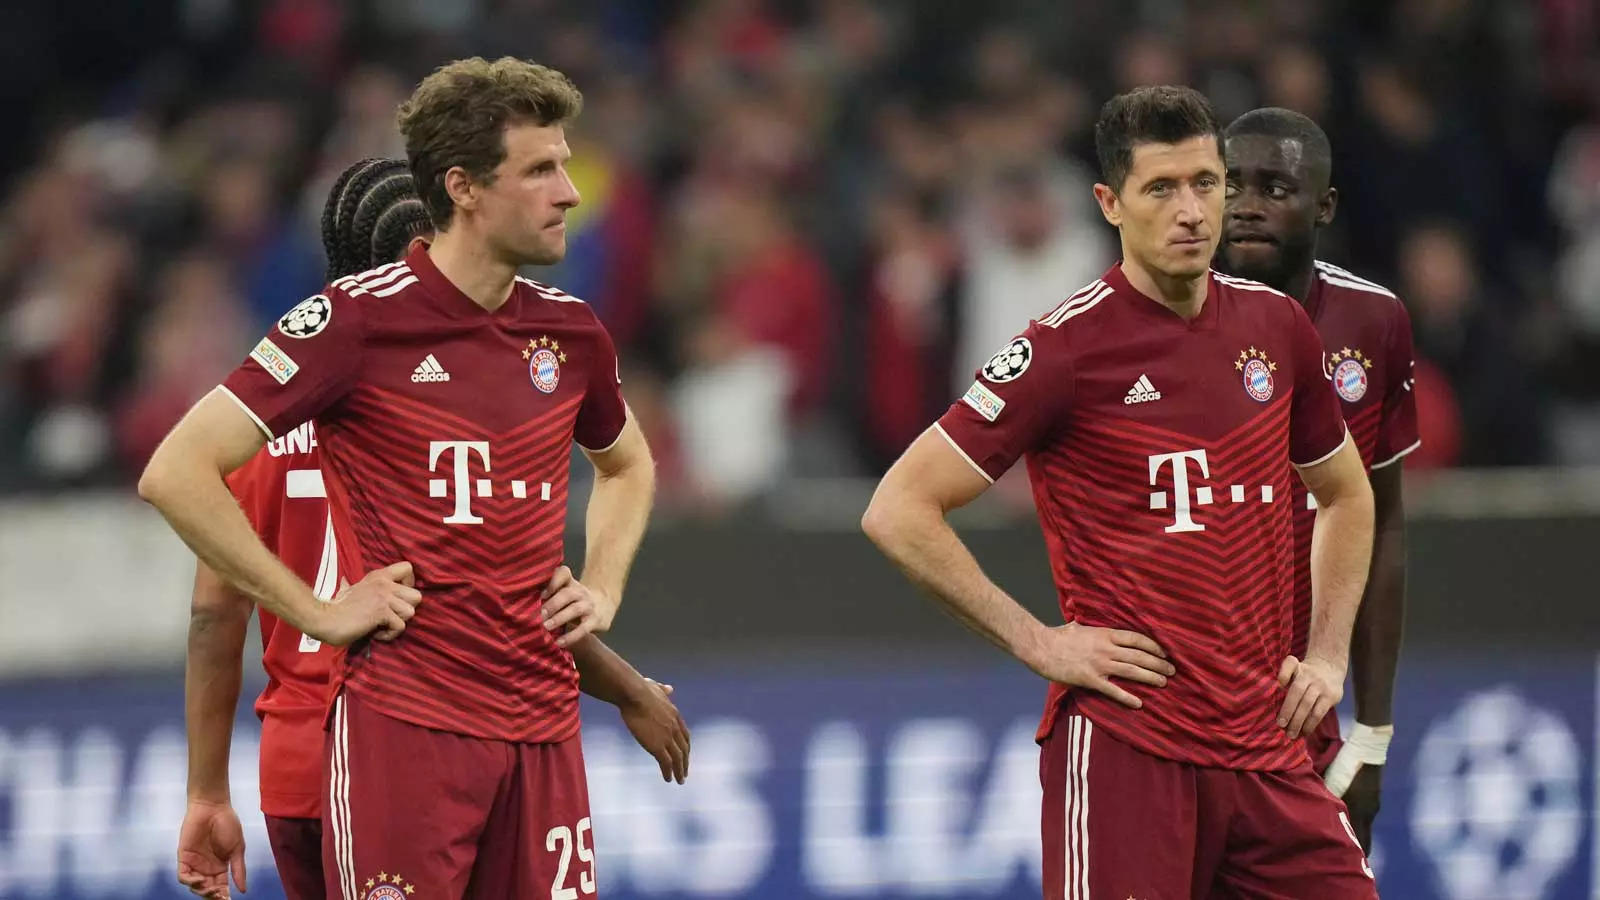 Bayern Munich were eliminated by Villareal from quarter-finals of Champions League